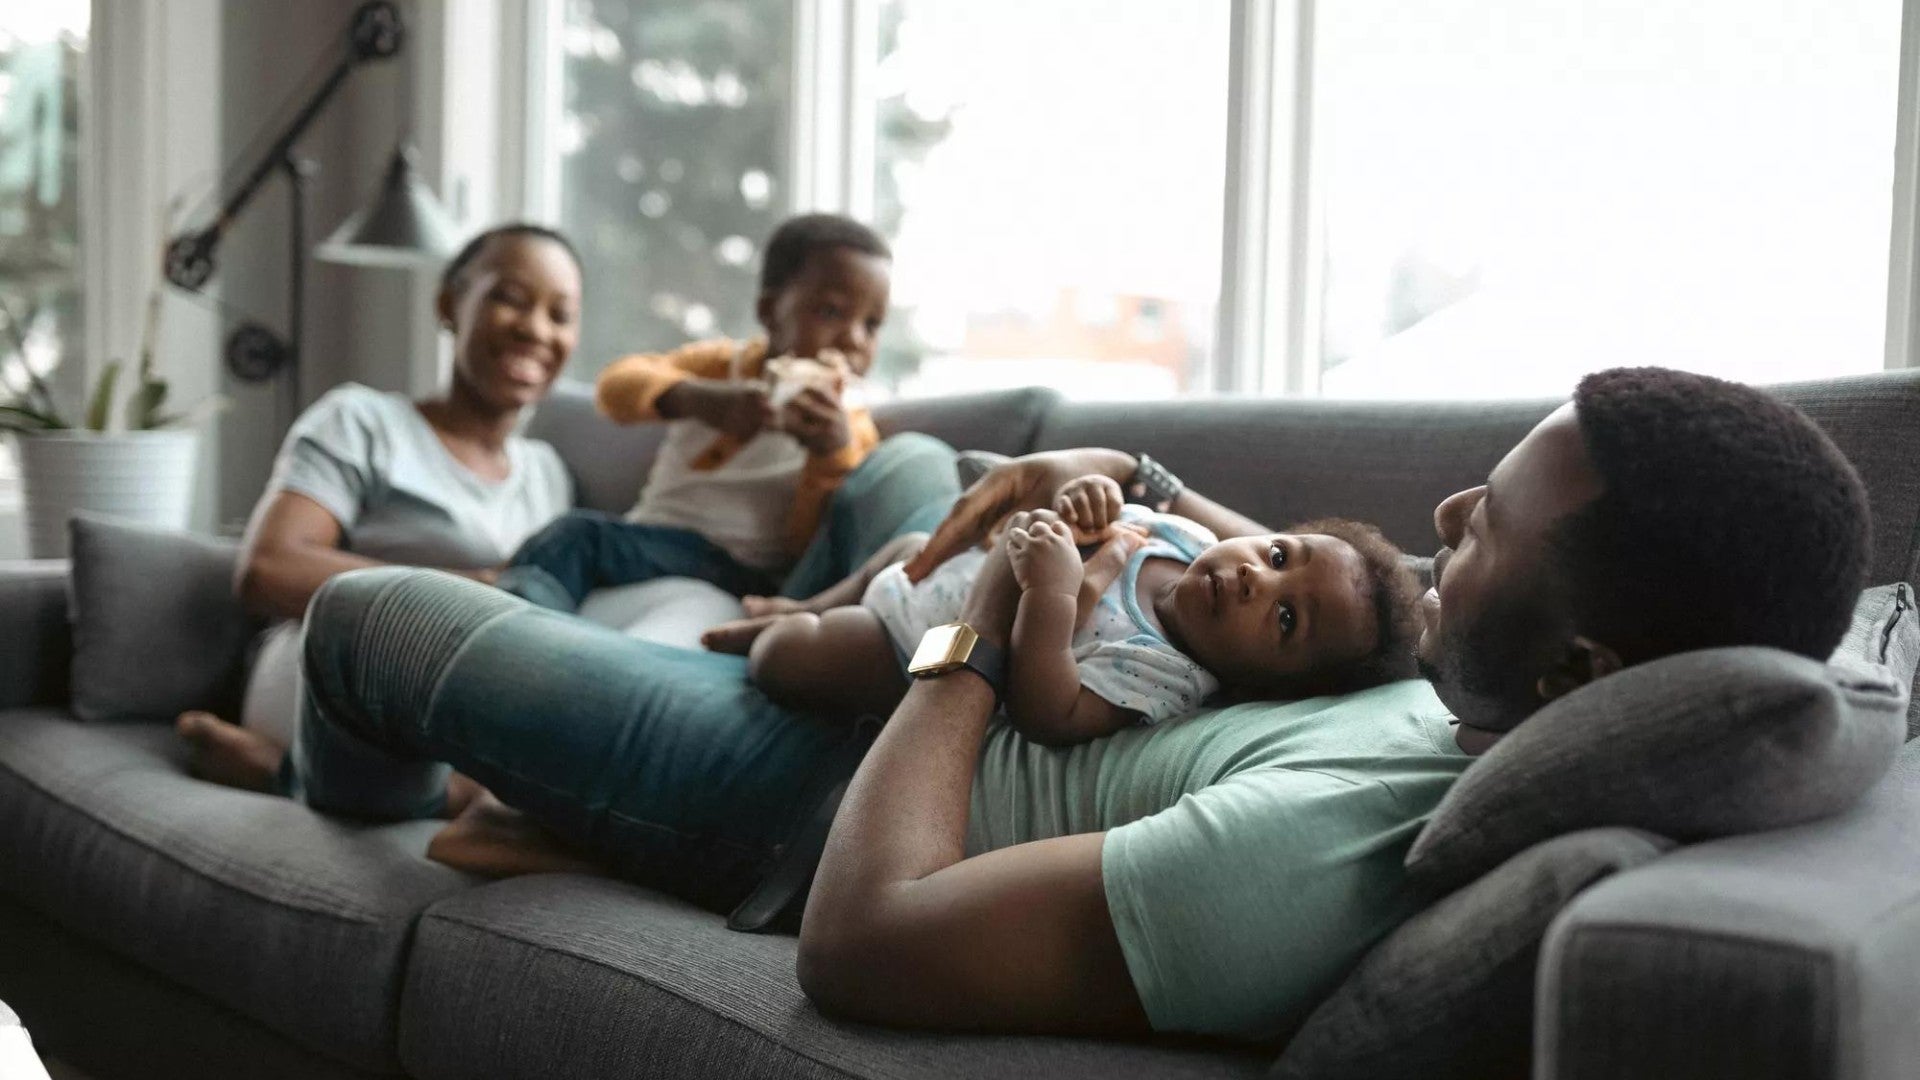 Happy Black family relaxing on a  gray couch with man holding a baby and woman next to a toddler.